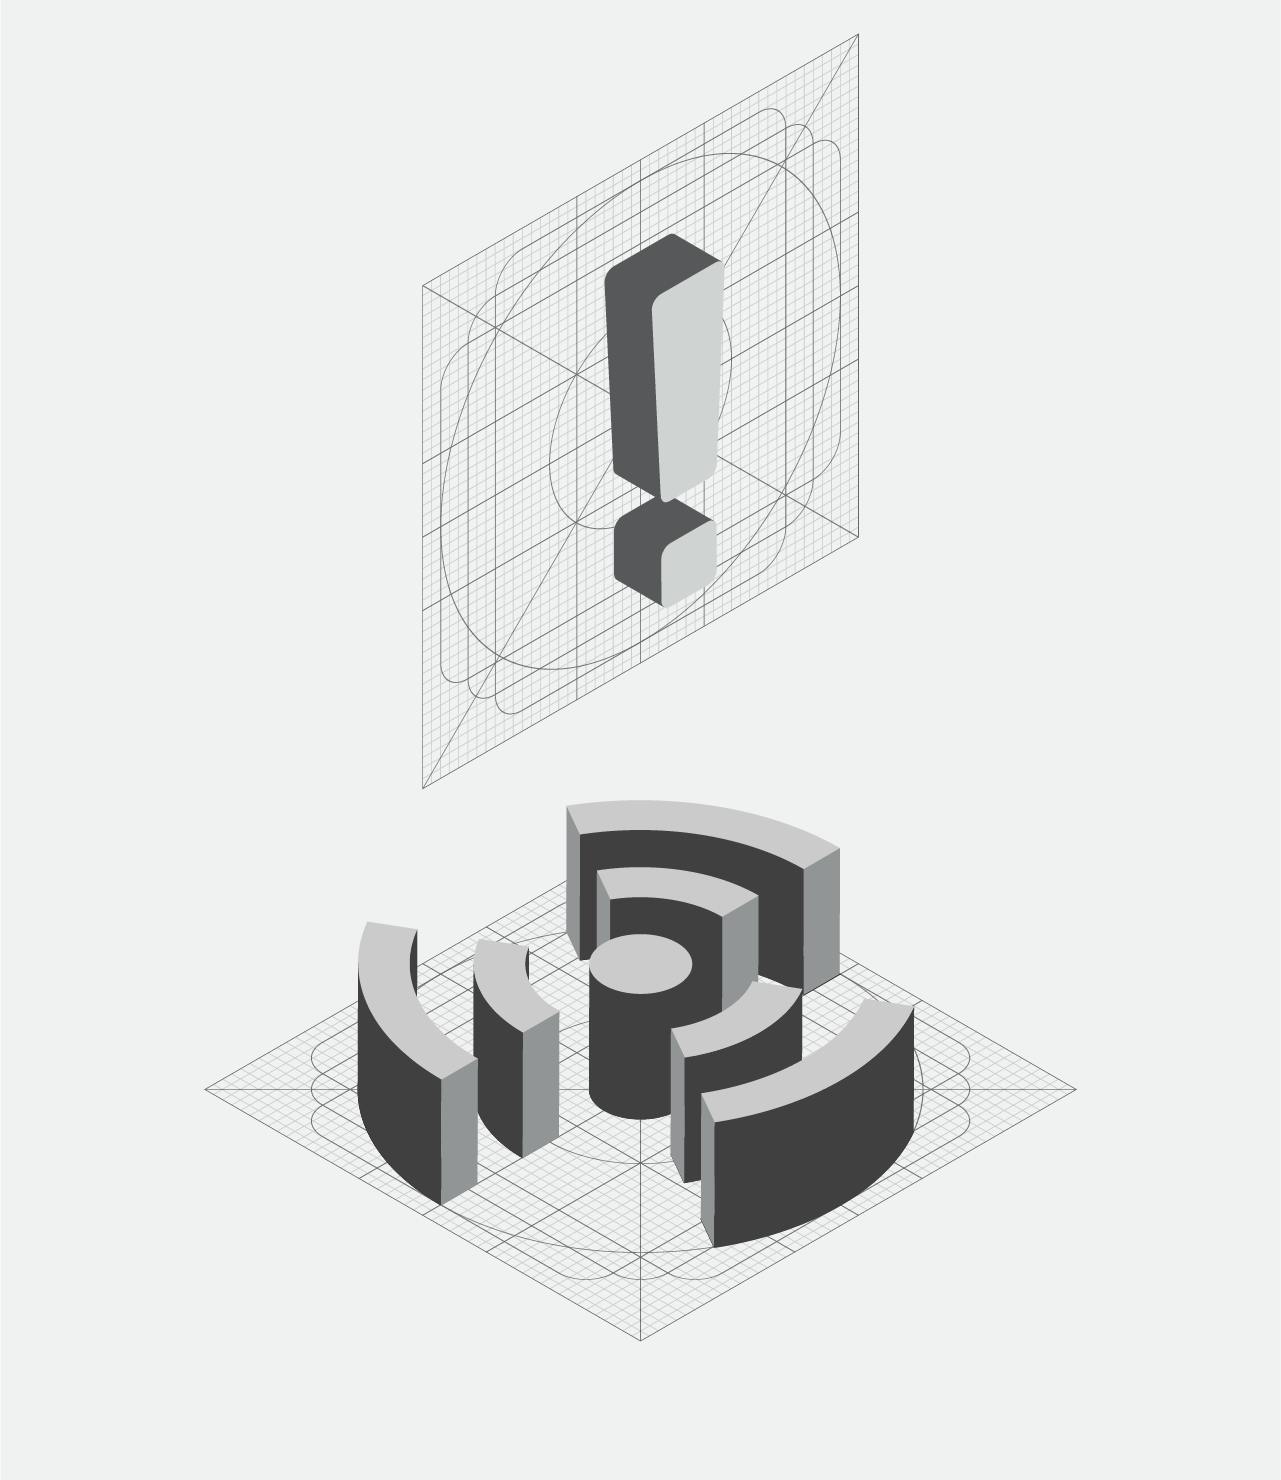 The isometric extrusion of the Monitors and Incidents icons- A 3d version of the two preceeding icons- each centered within their own grid, on a light gray background.